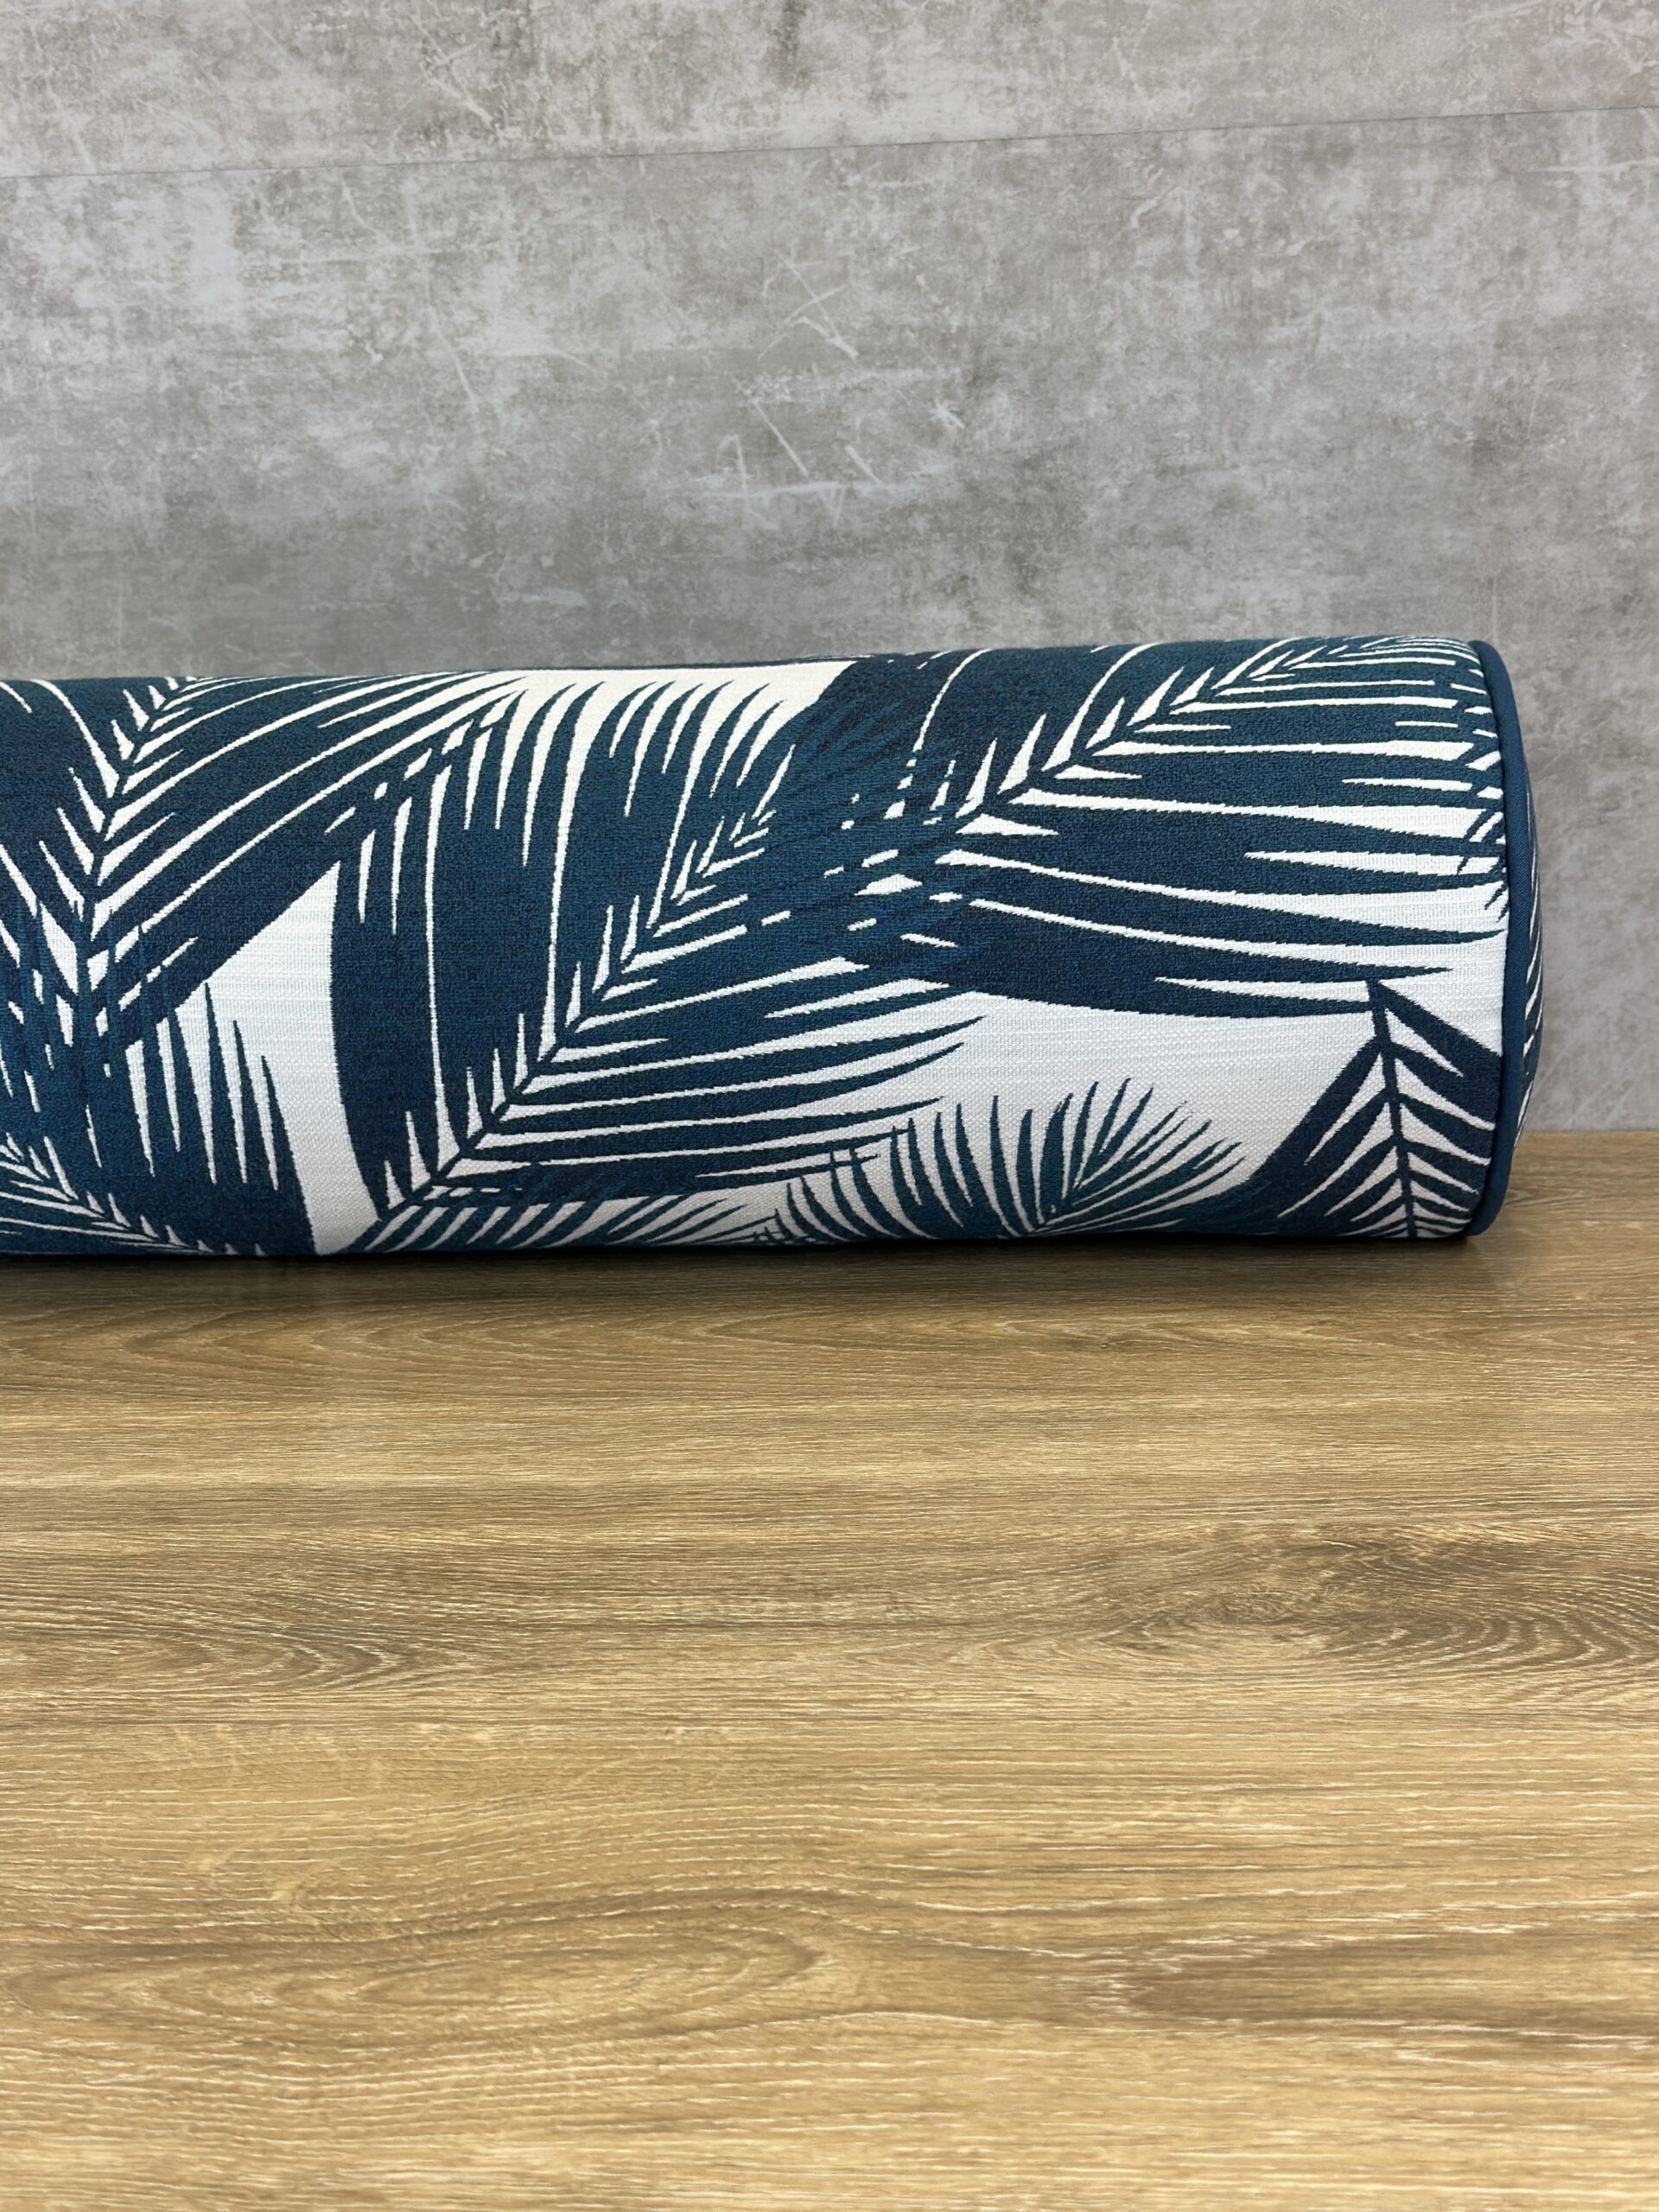 Great Outdoors Yucca Pillows